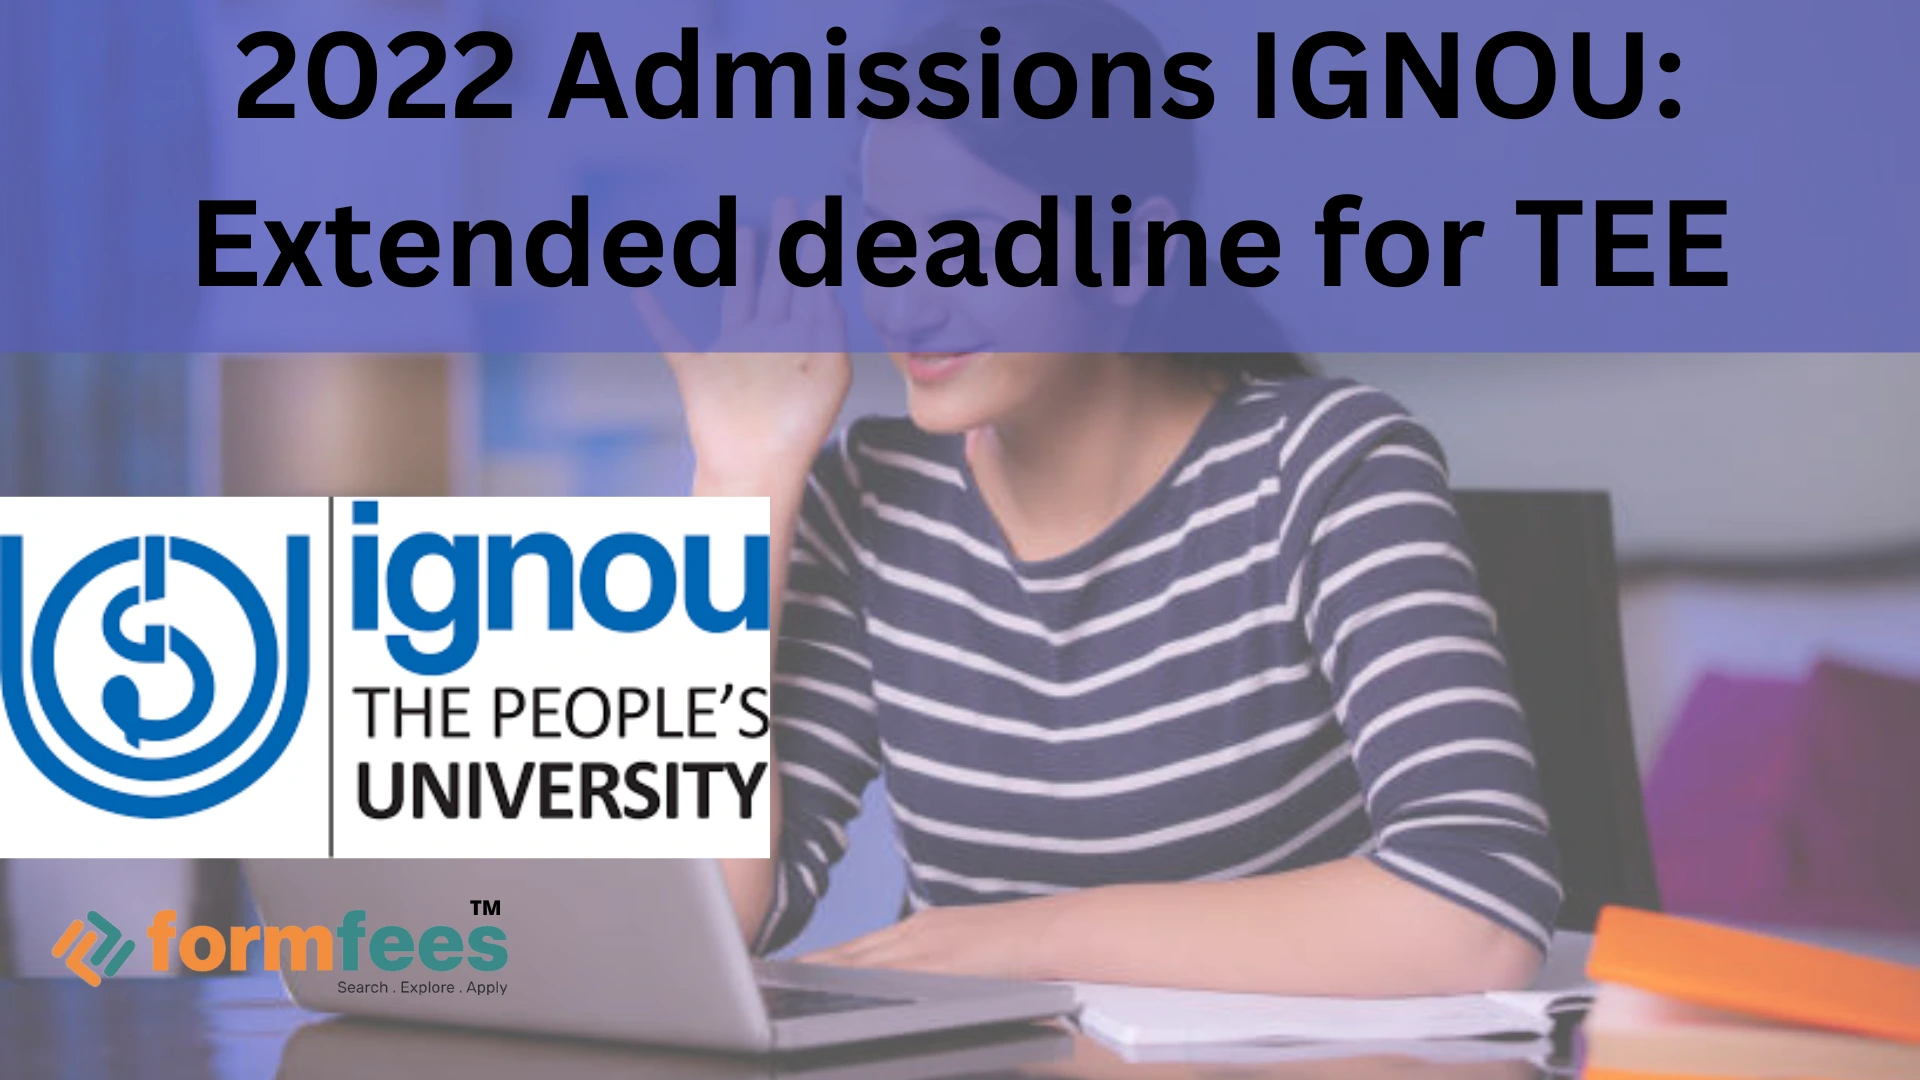 2022 Admissions IGNOU Extended deadline for TEE